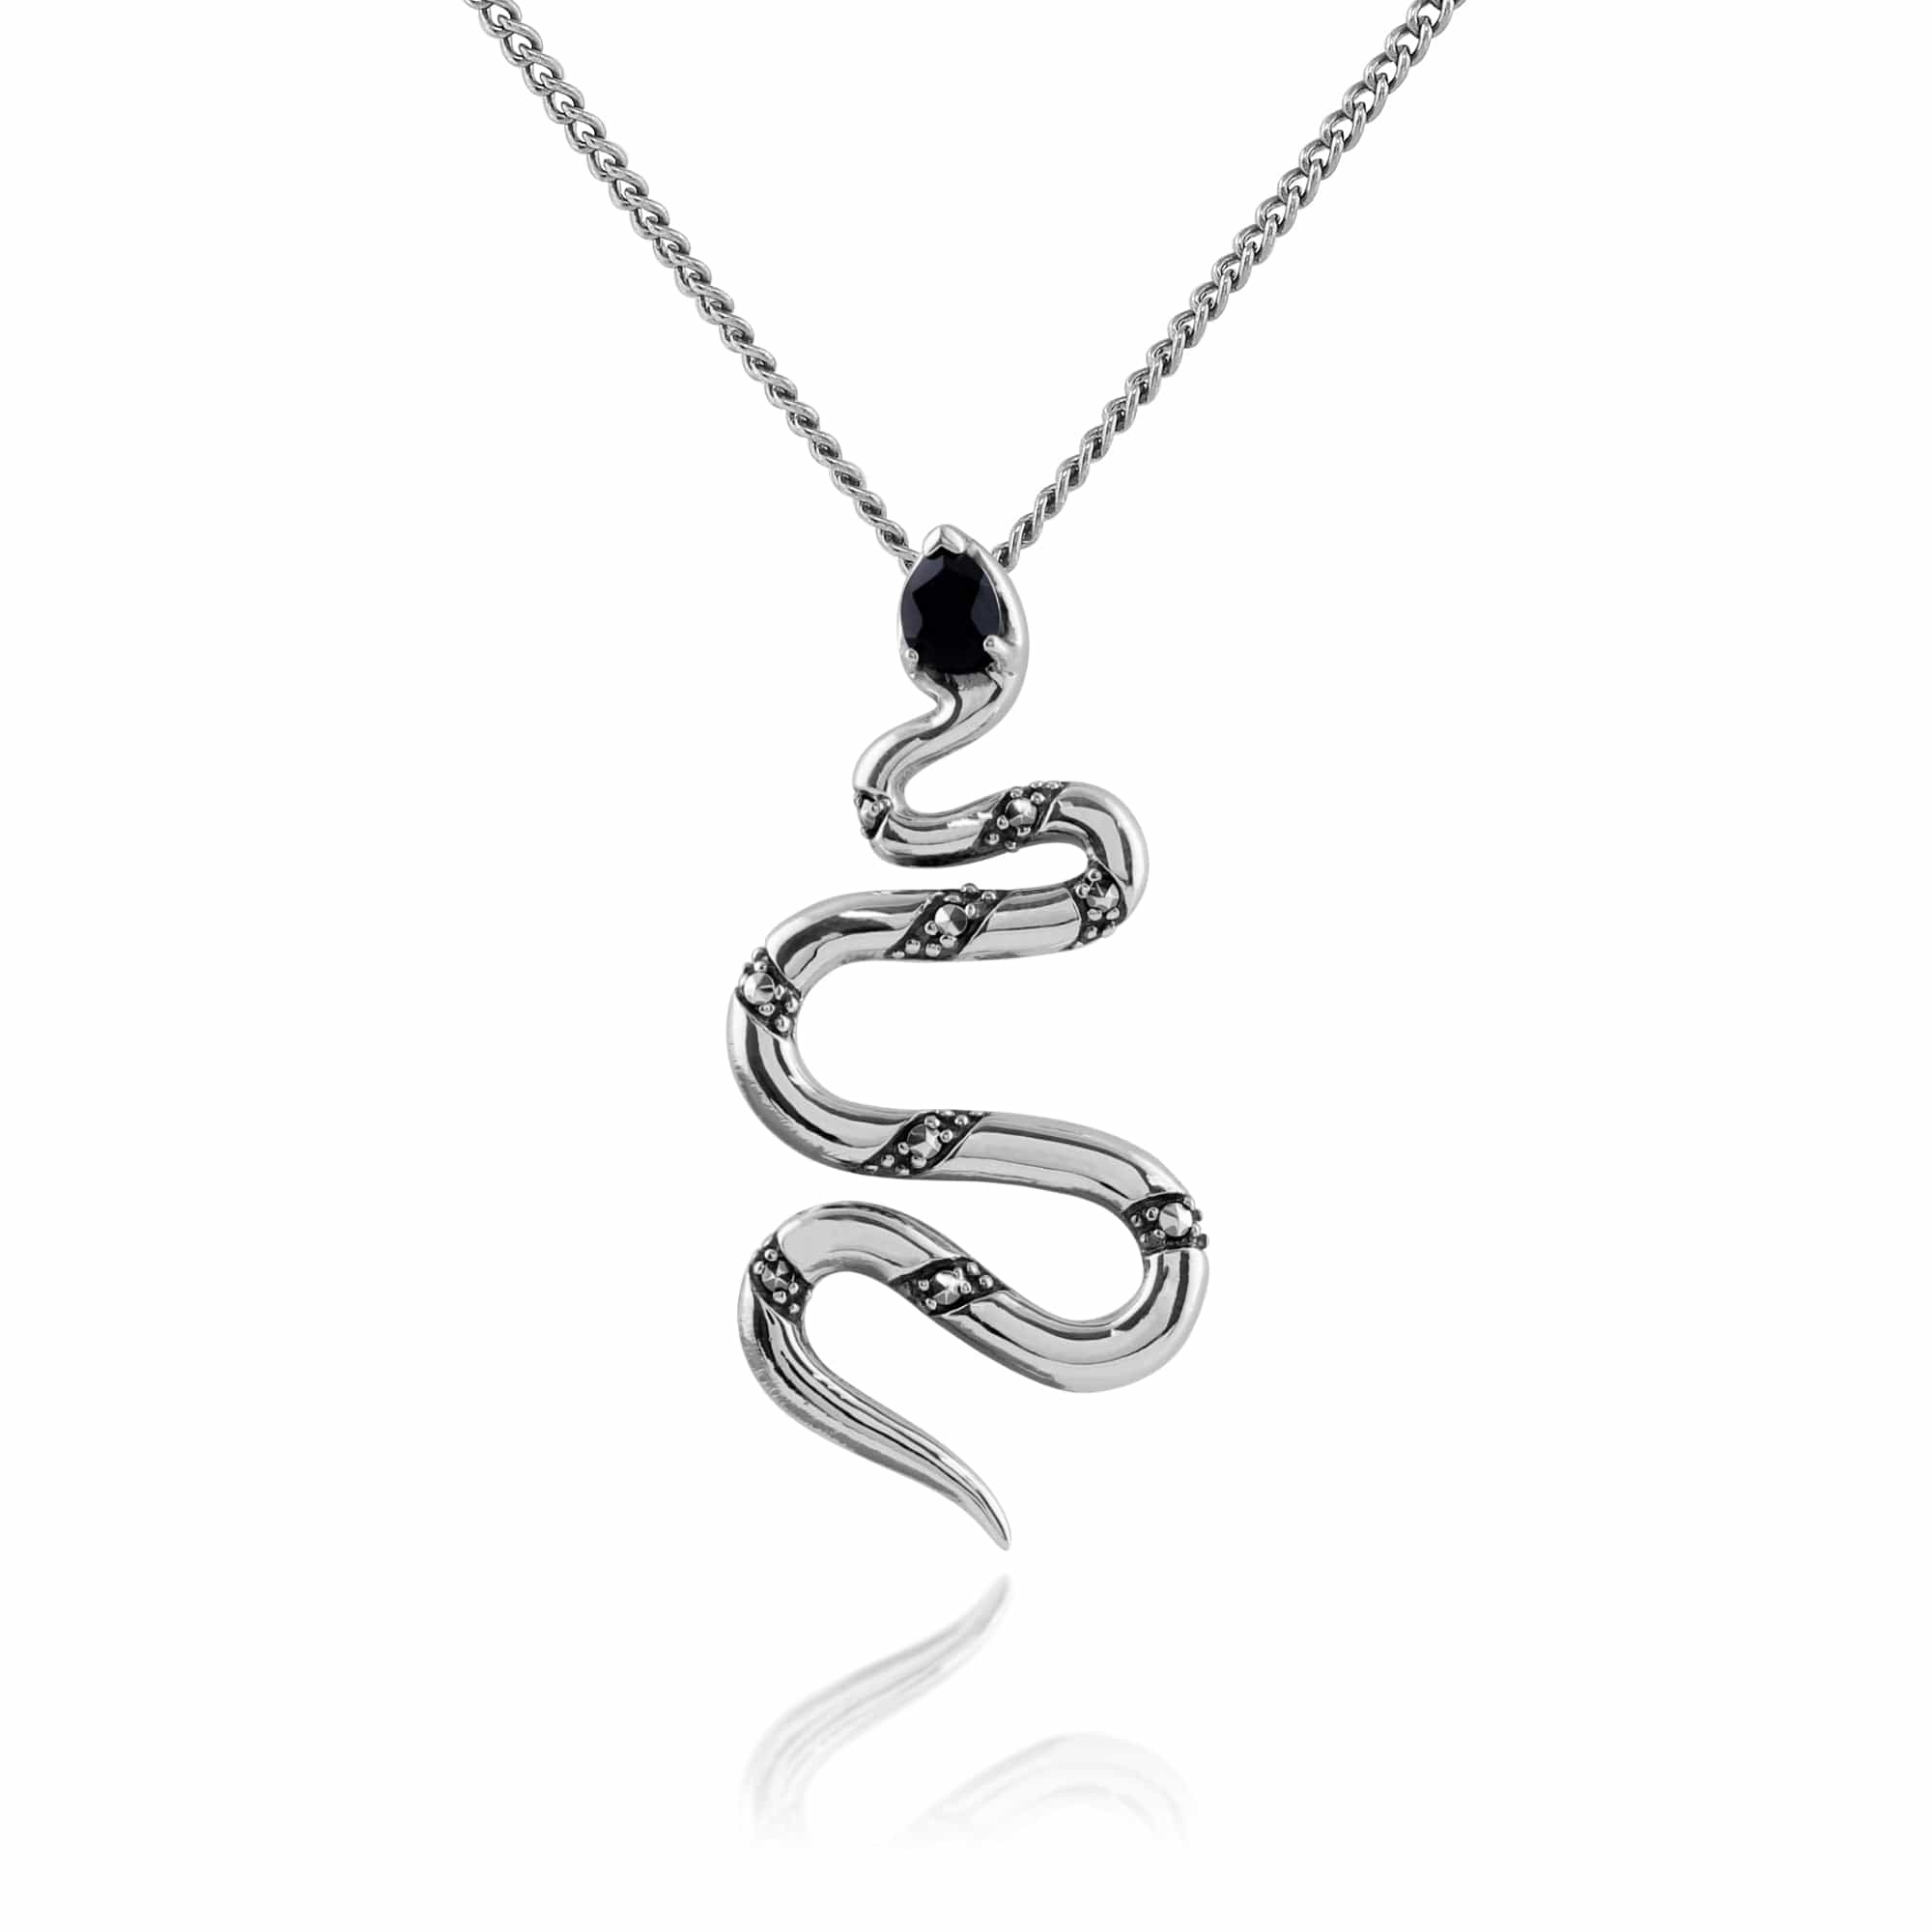 Art Deco Style Pear Black Spinel & Marcasite Snake Necklace in 925 Sterling Silver - Gemondo